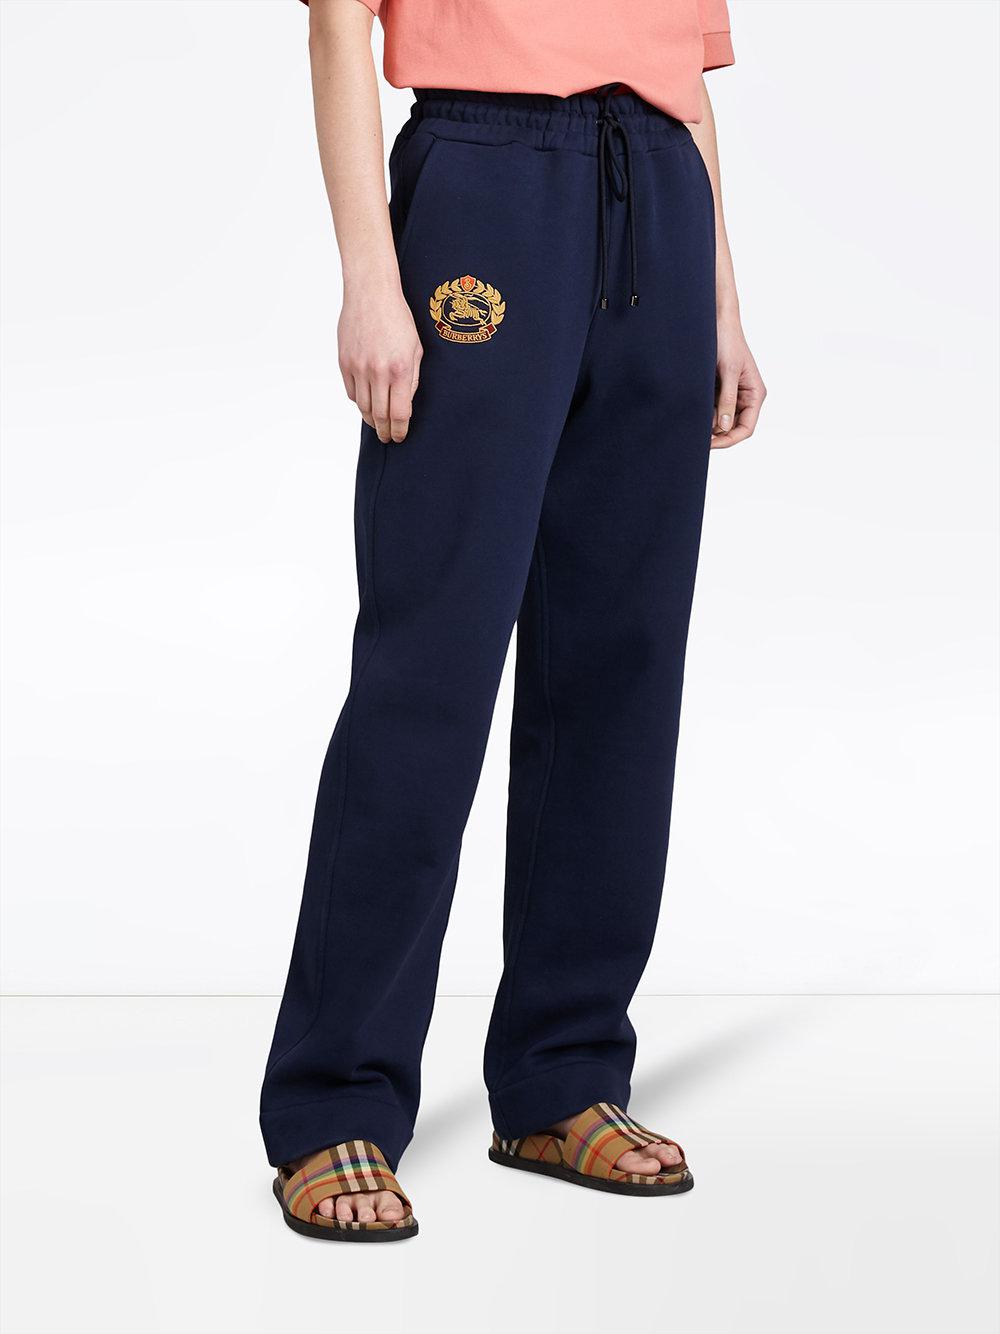 burberry embroidered jersey sweatpants